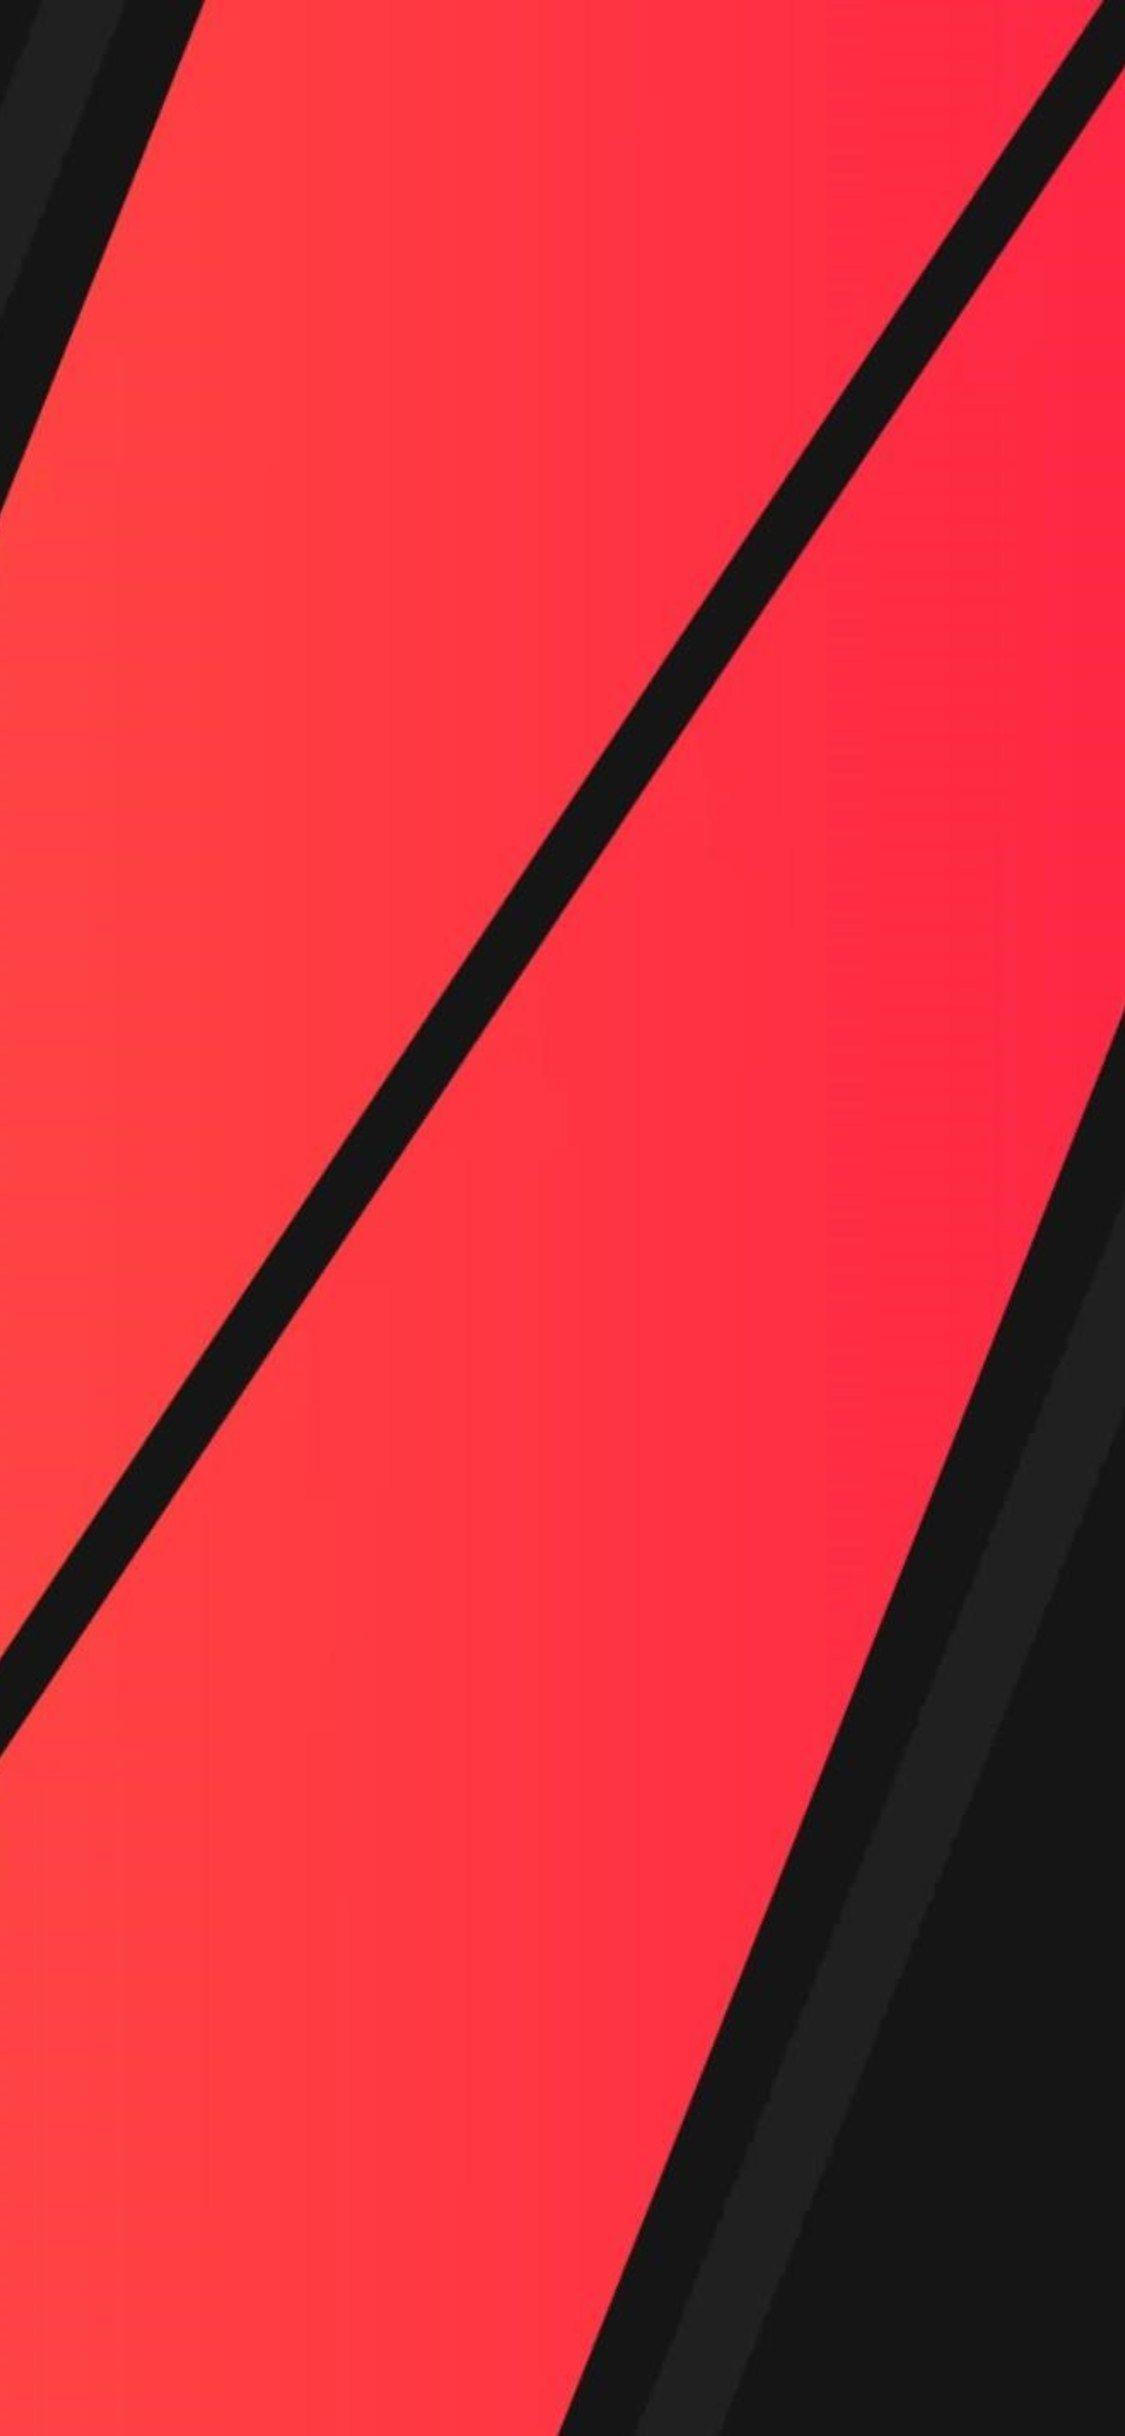 4K Red and Black iPhone Wallpapers - Top Free 4K Red and Black iPhone ...